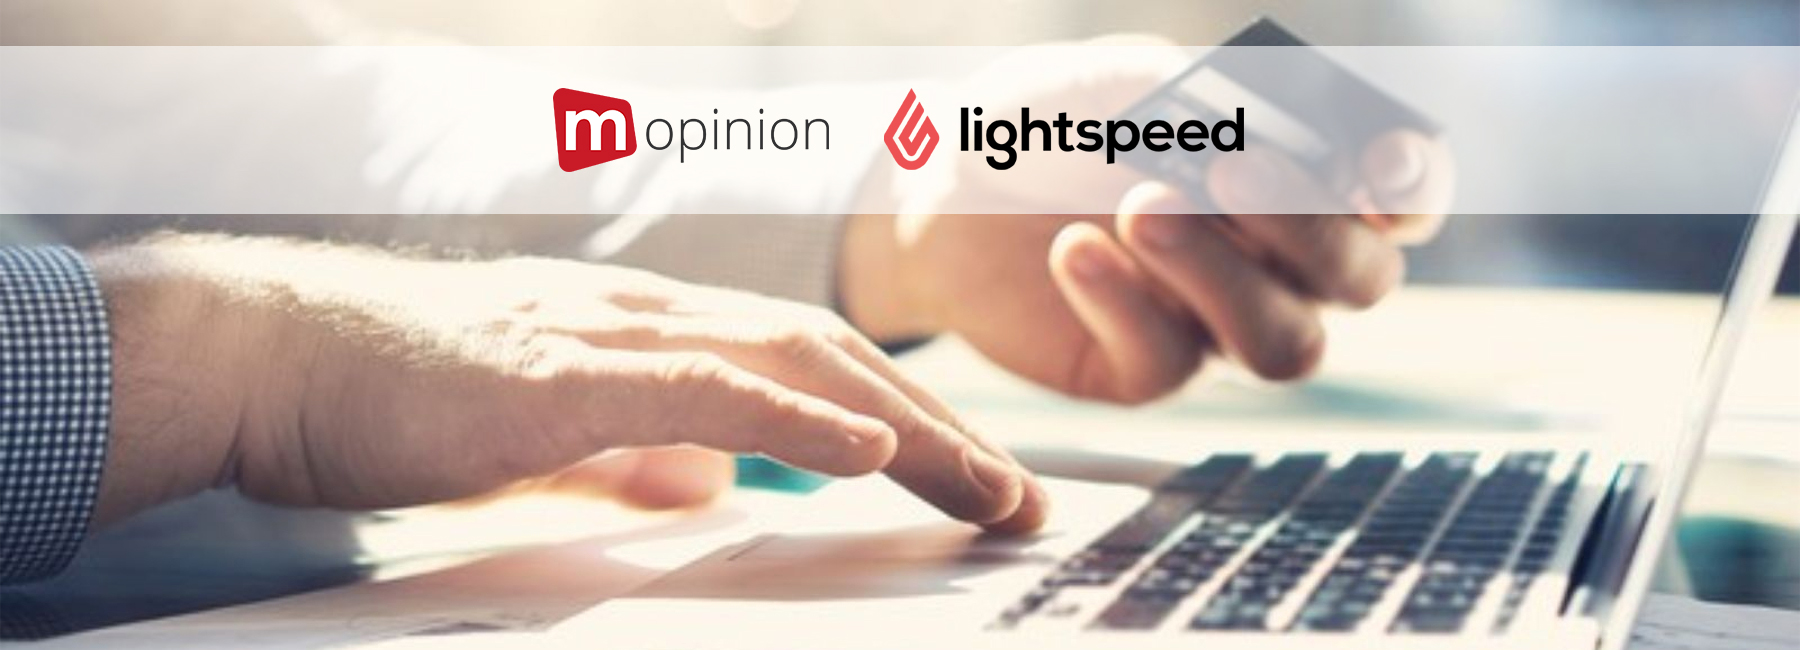 Mopinion software now available in Lightspeed app store